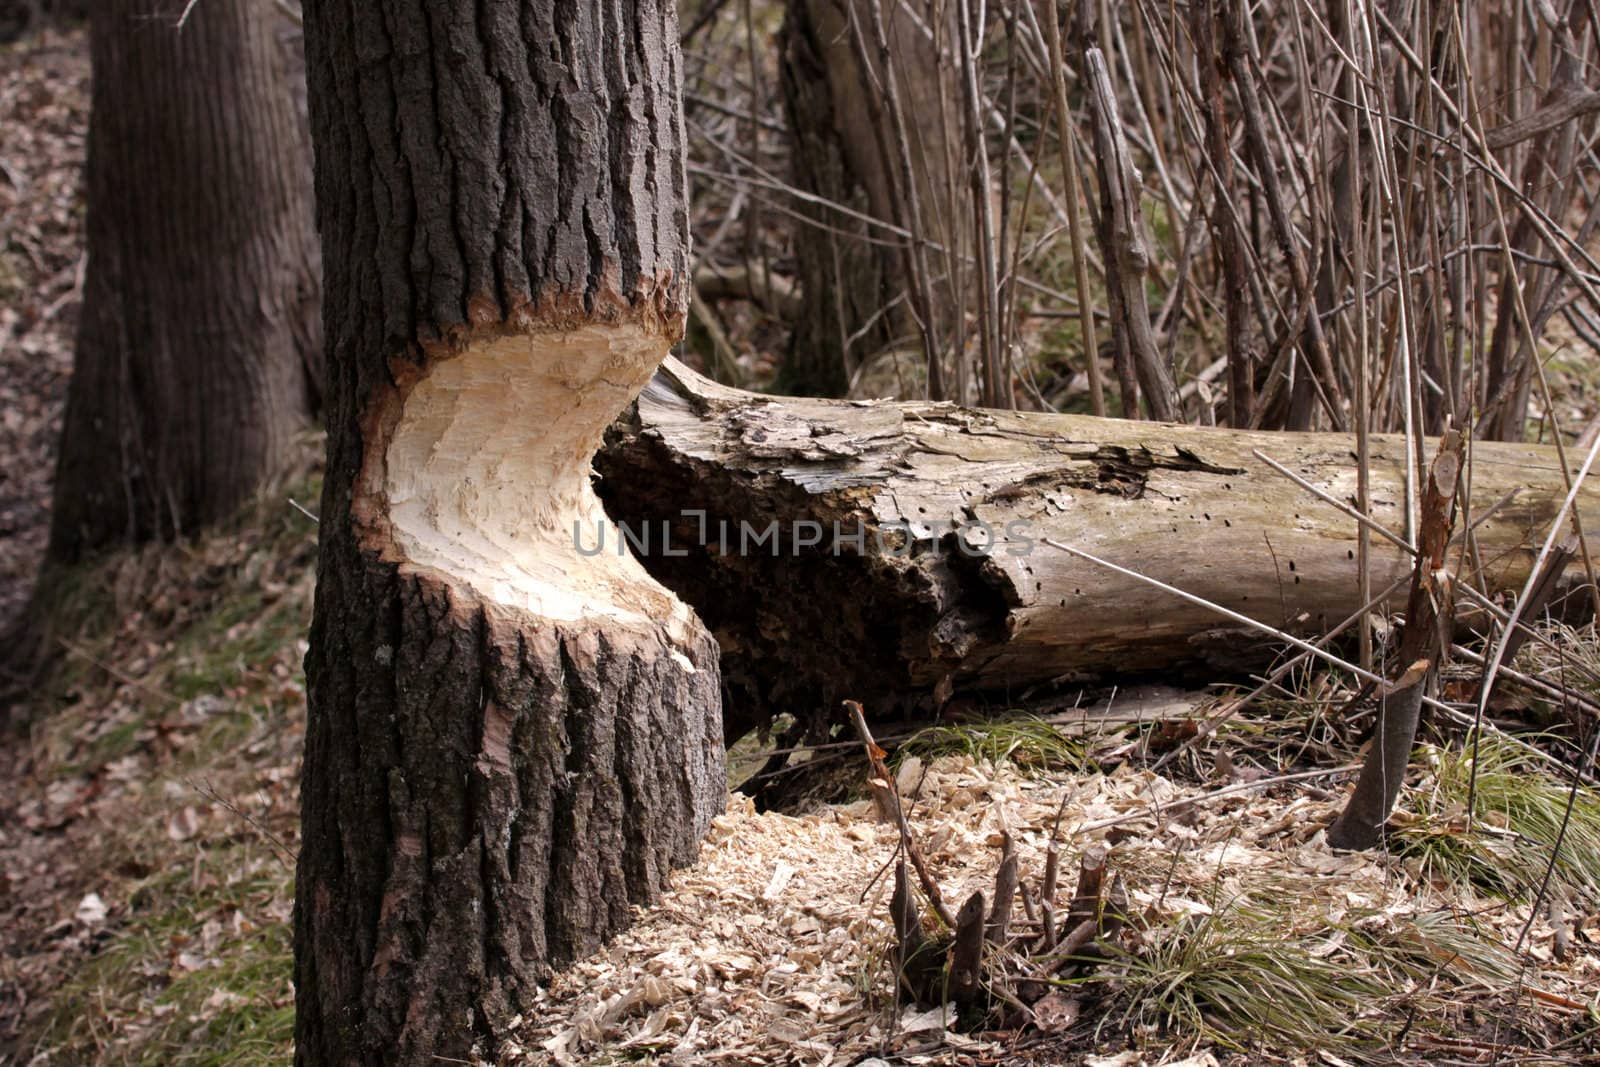 A tree on the verge of falling after being eaten away at by a beaver.